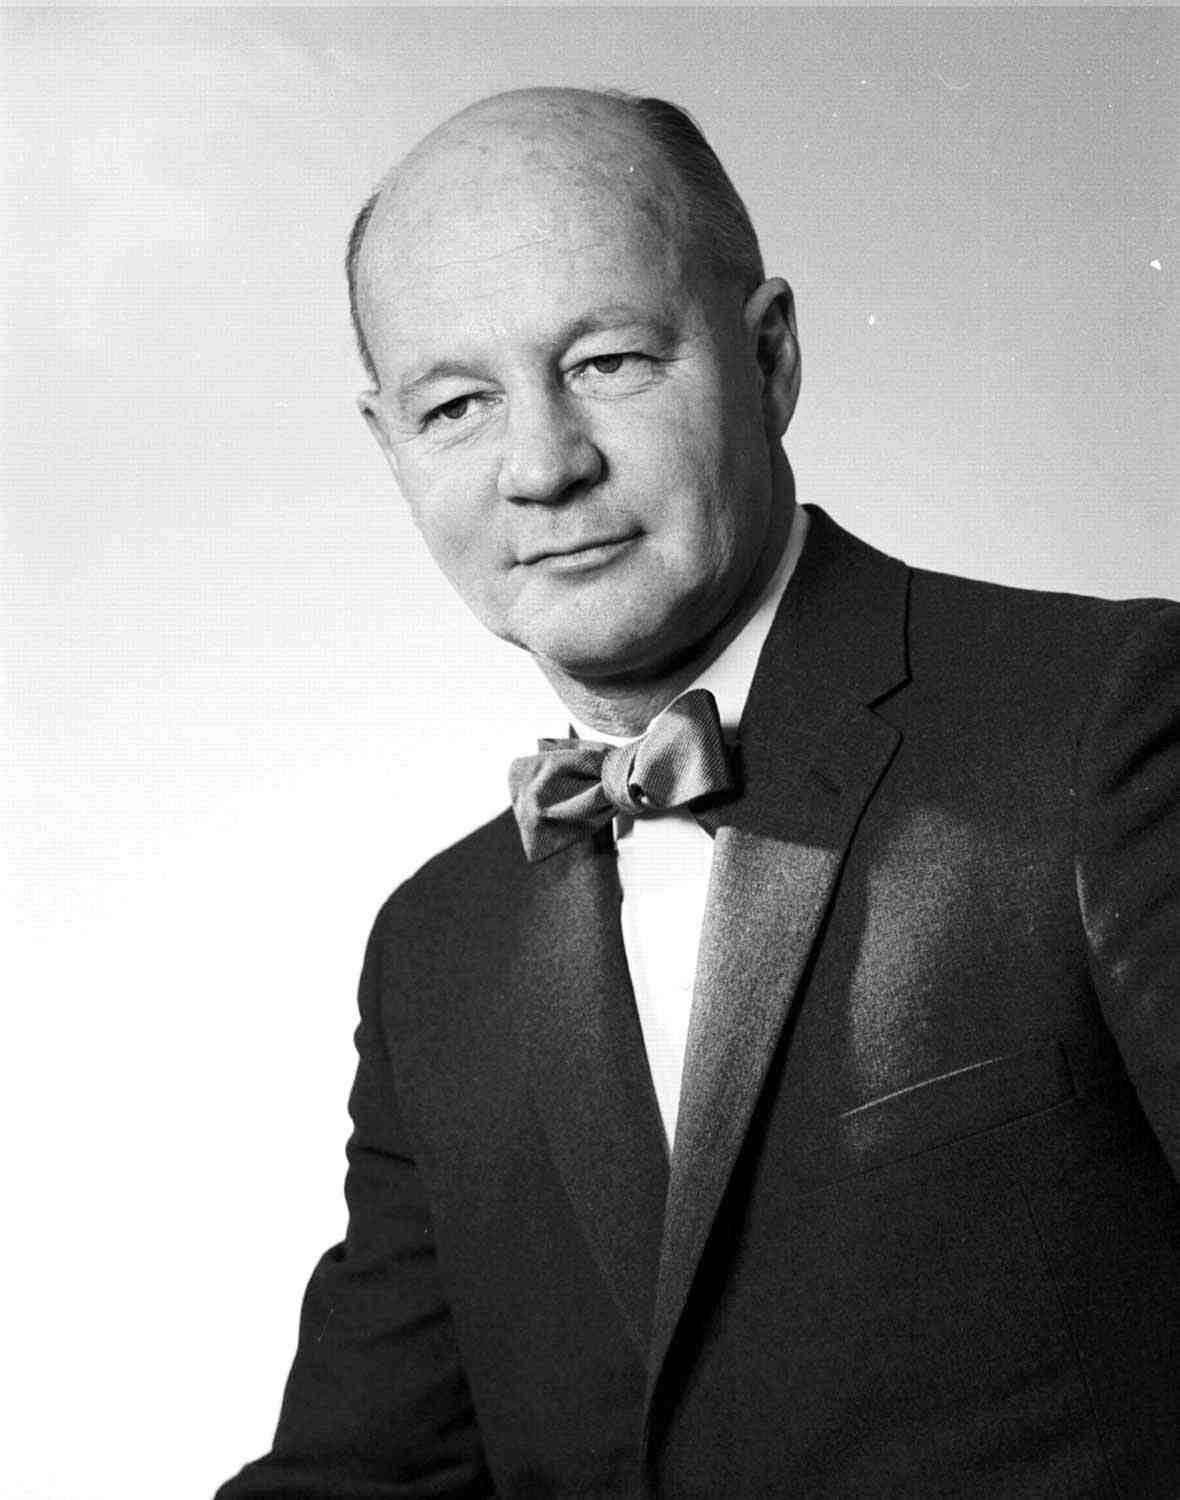 Dr. William Mustard (Photo courtesy of Hospital Archives, The Hospital for Sick Children, Toronto)